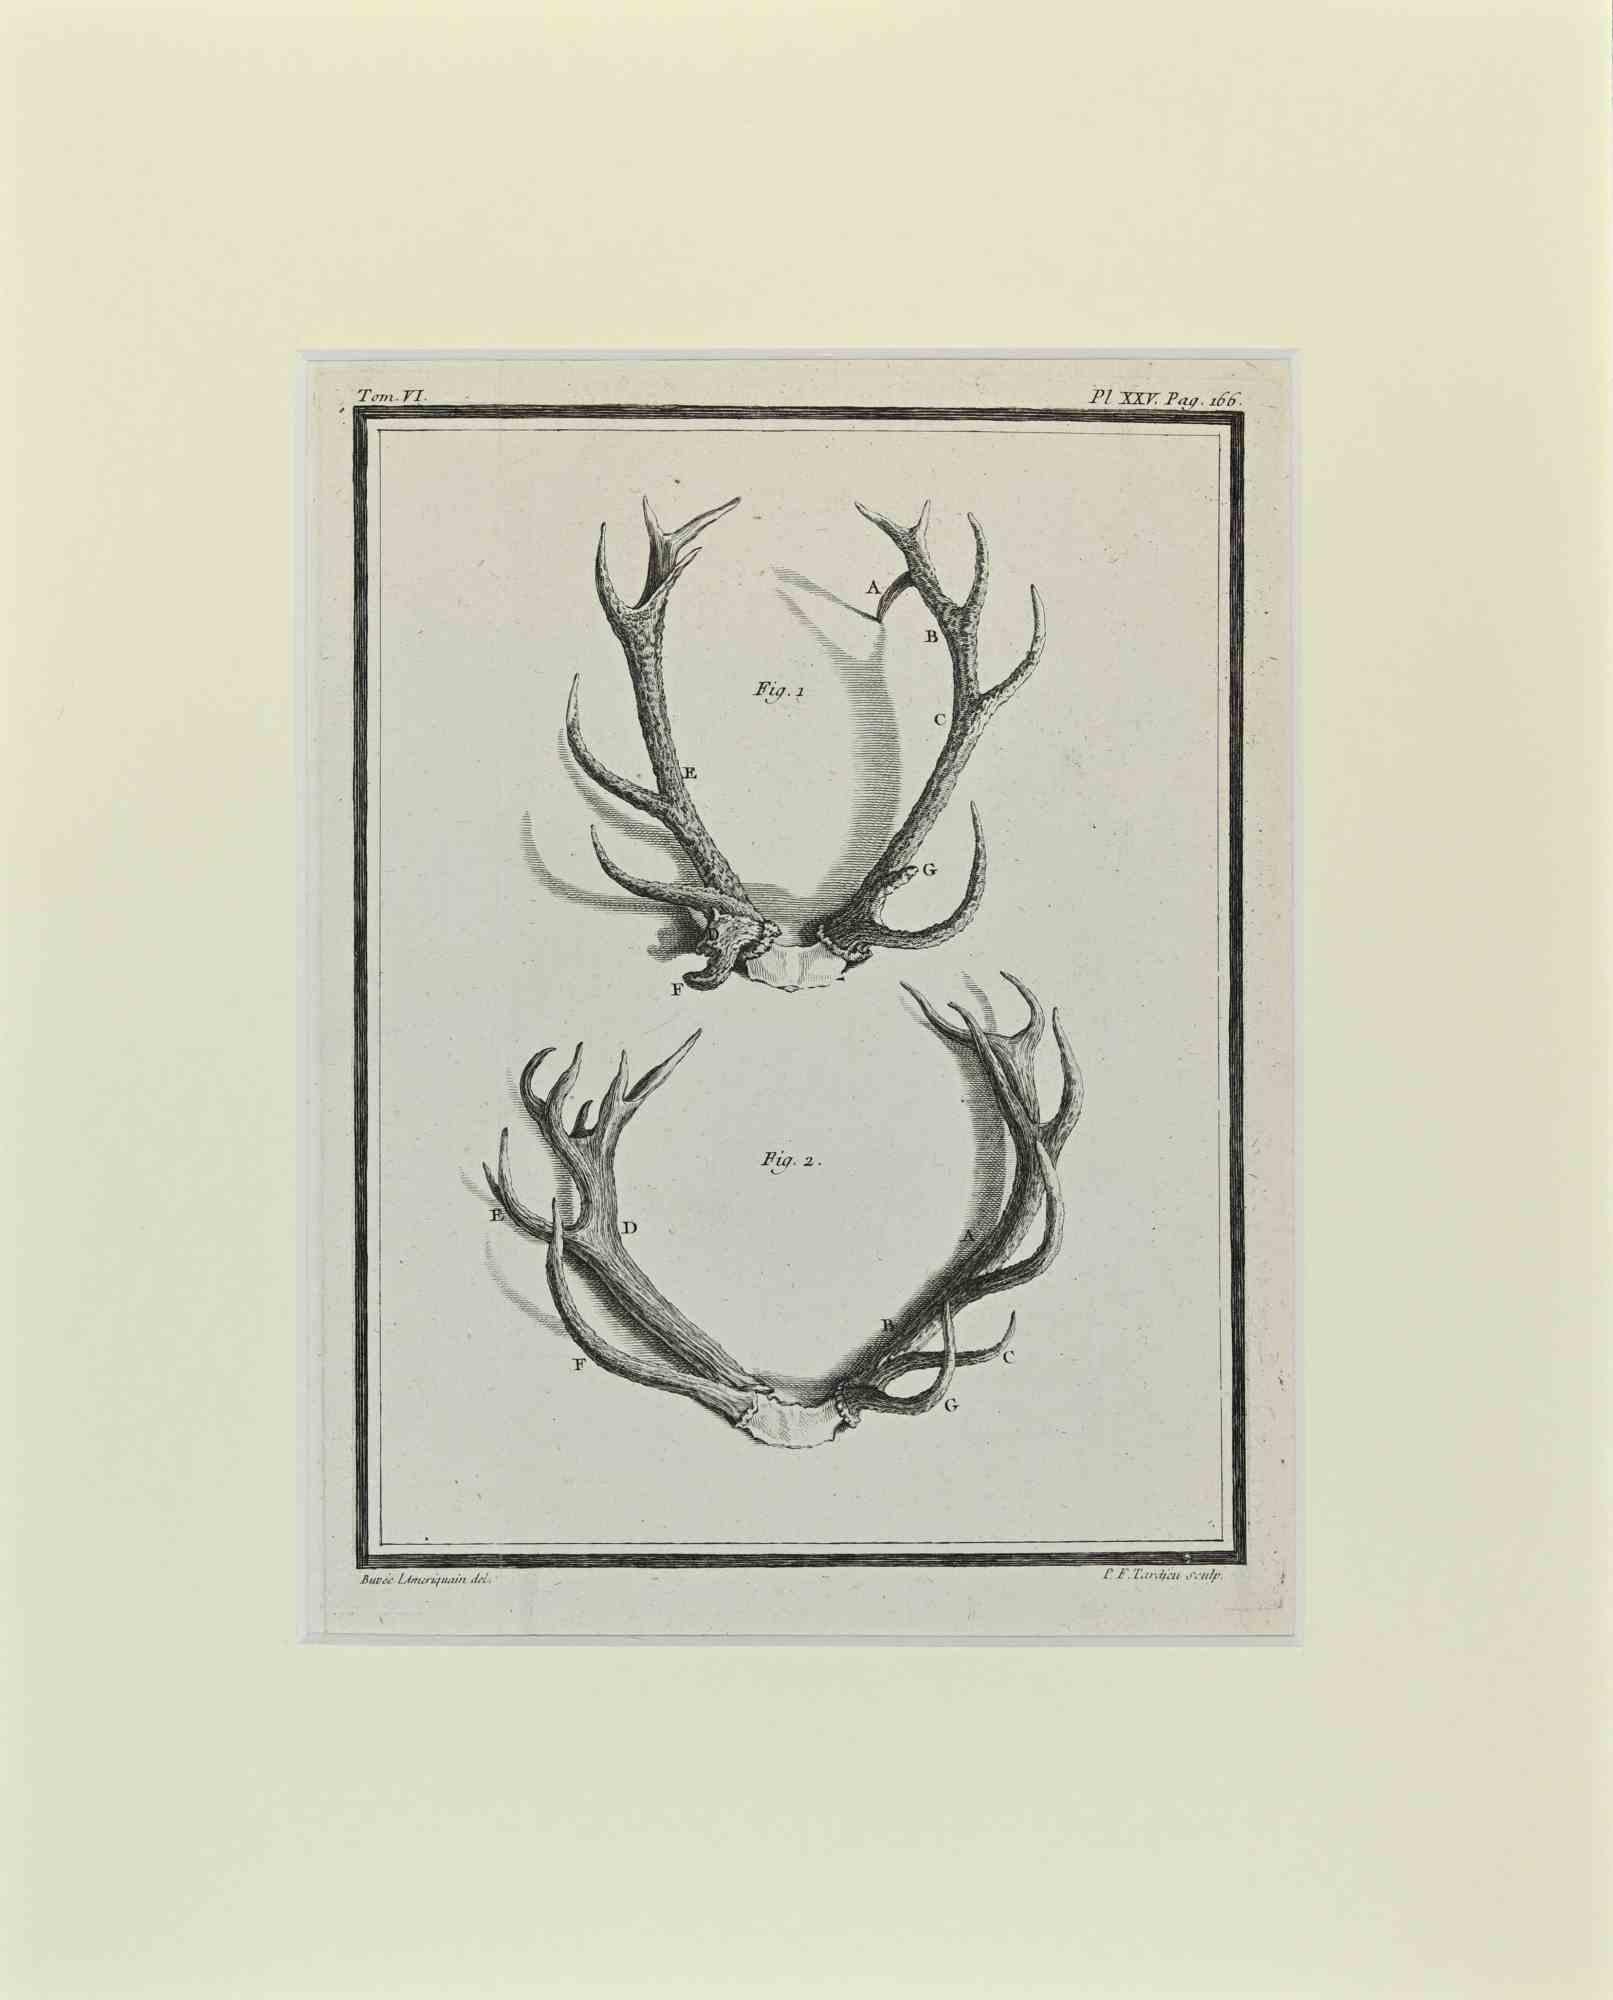 Cornamentas is an artwork realized  by  Buvée l'Américain in 1771.  

Etching B./W. print  on ivory paper. Signed on  plate on the lower left margin.

The work is glued on cardboard. Total dimensions: 35x28 cm.

The artwork belongs to the suite